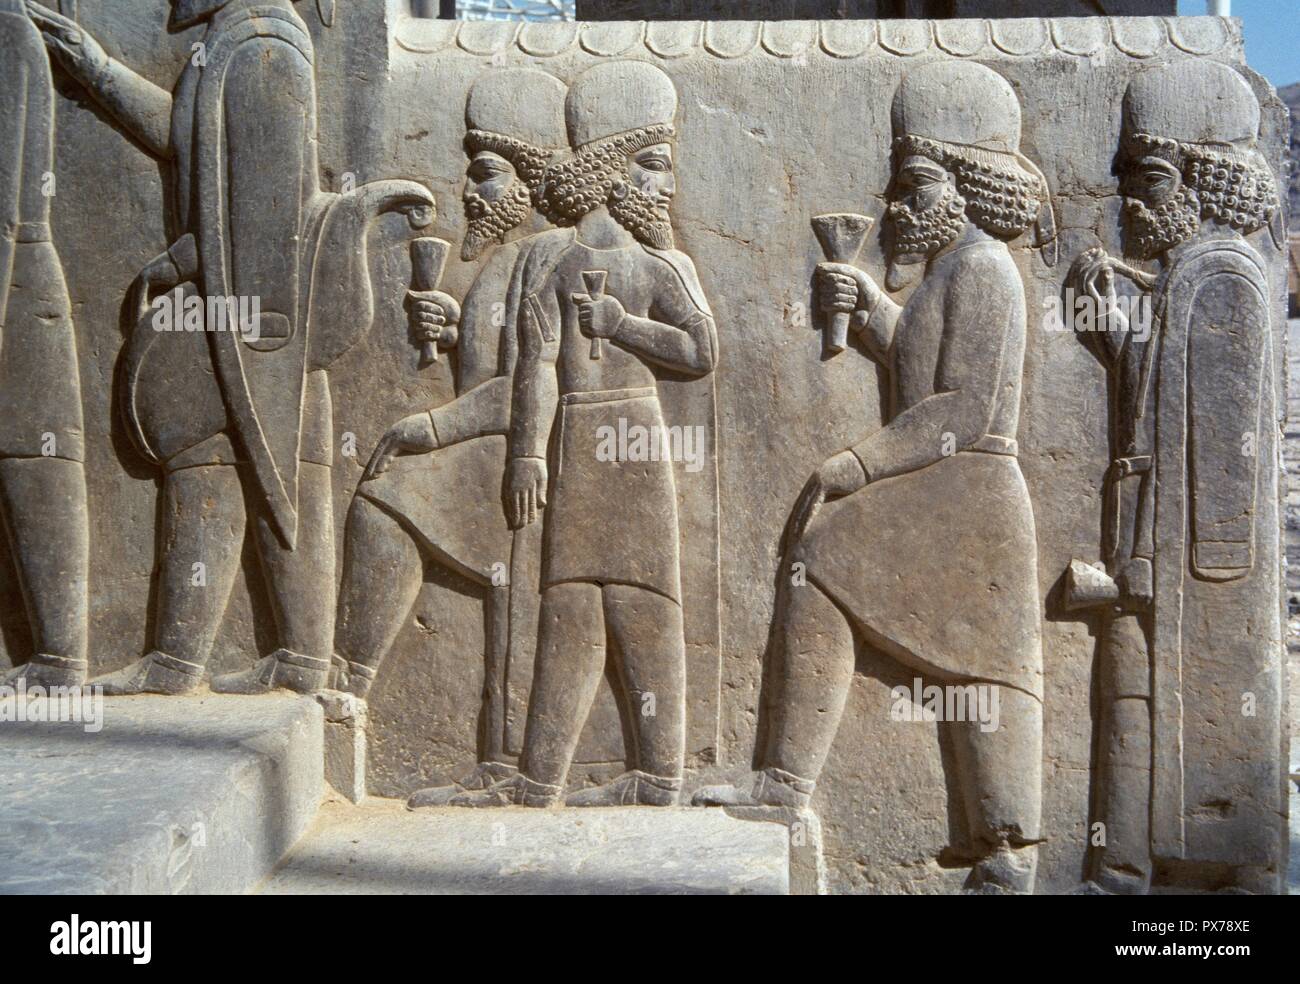 Persepolis. Reliefs on the stairs of the Tripylon, depicting the dignitaries addressing to the party of Nowruz. Detail. Darius I (522-486 BC) and Xerxes I (486-465 BC) period. Islamic Republic of Iran. Stock Photo